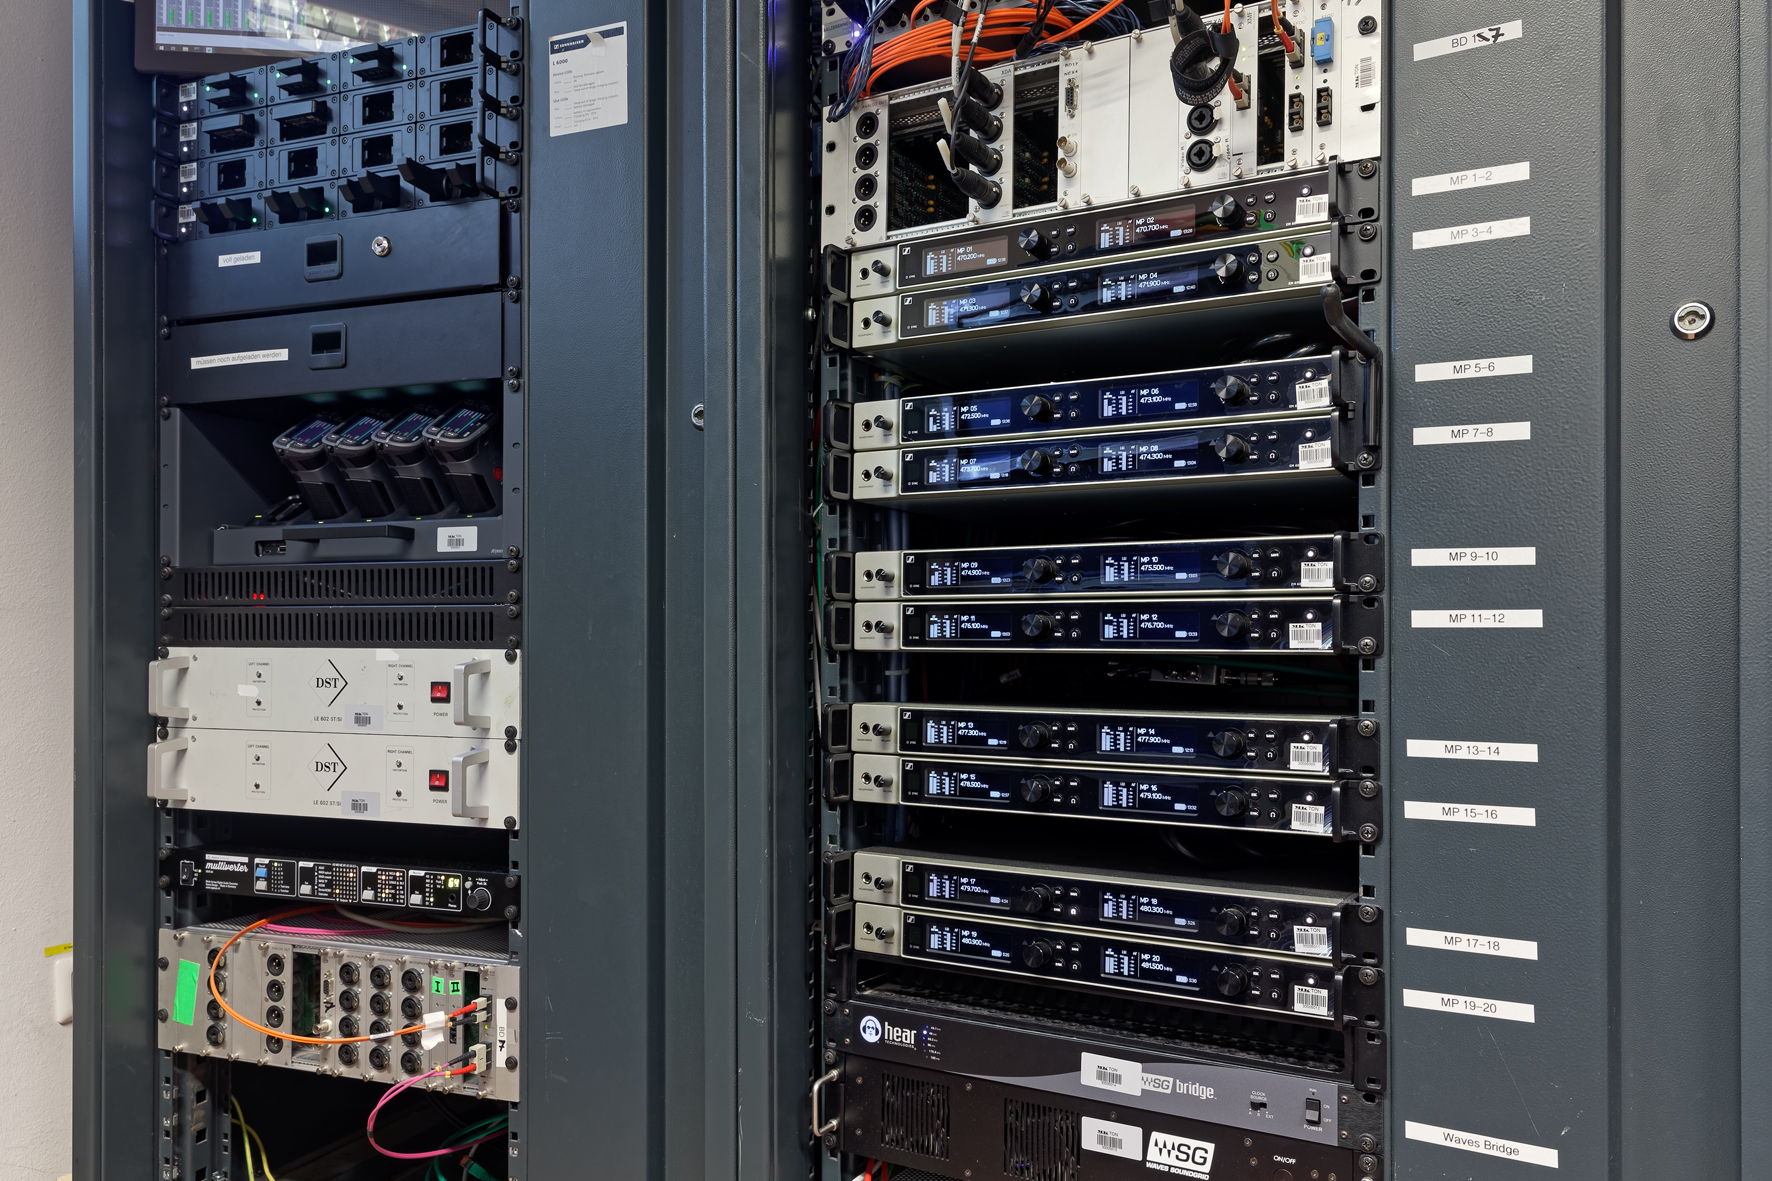 At the Schauspielhaus of the Munich Kammerspiele, ten EM 6000 two-channel receivers provide 20 digital wireless channels for performances ​